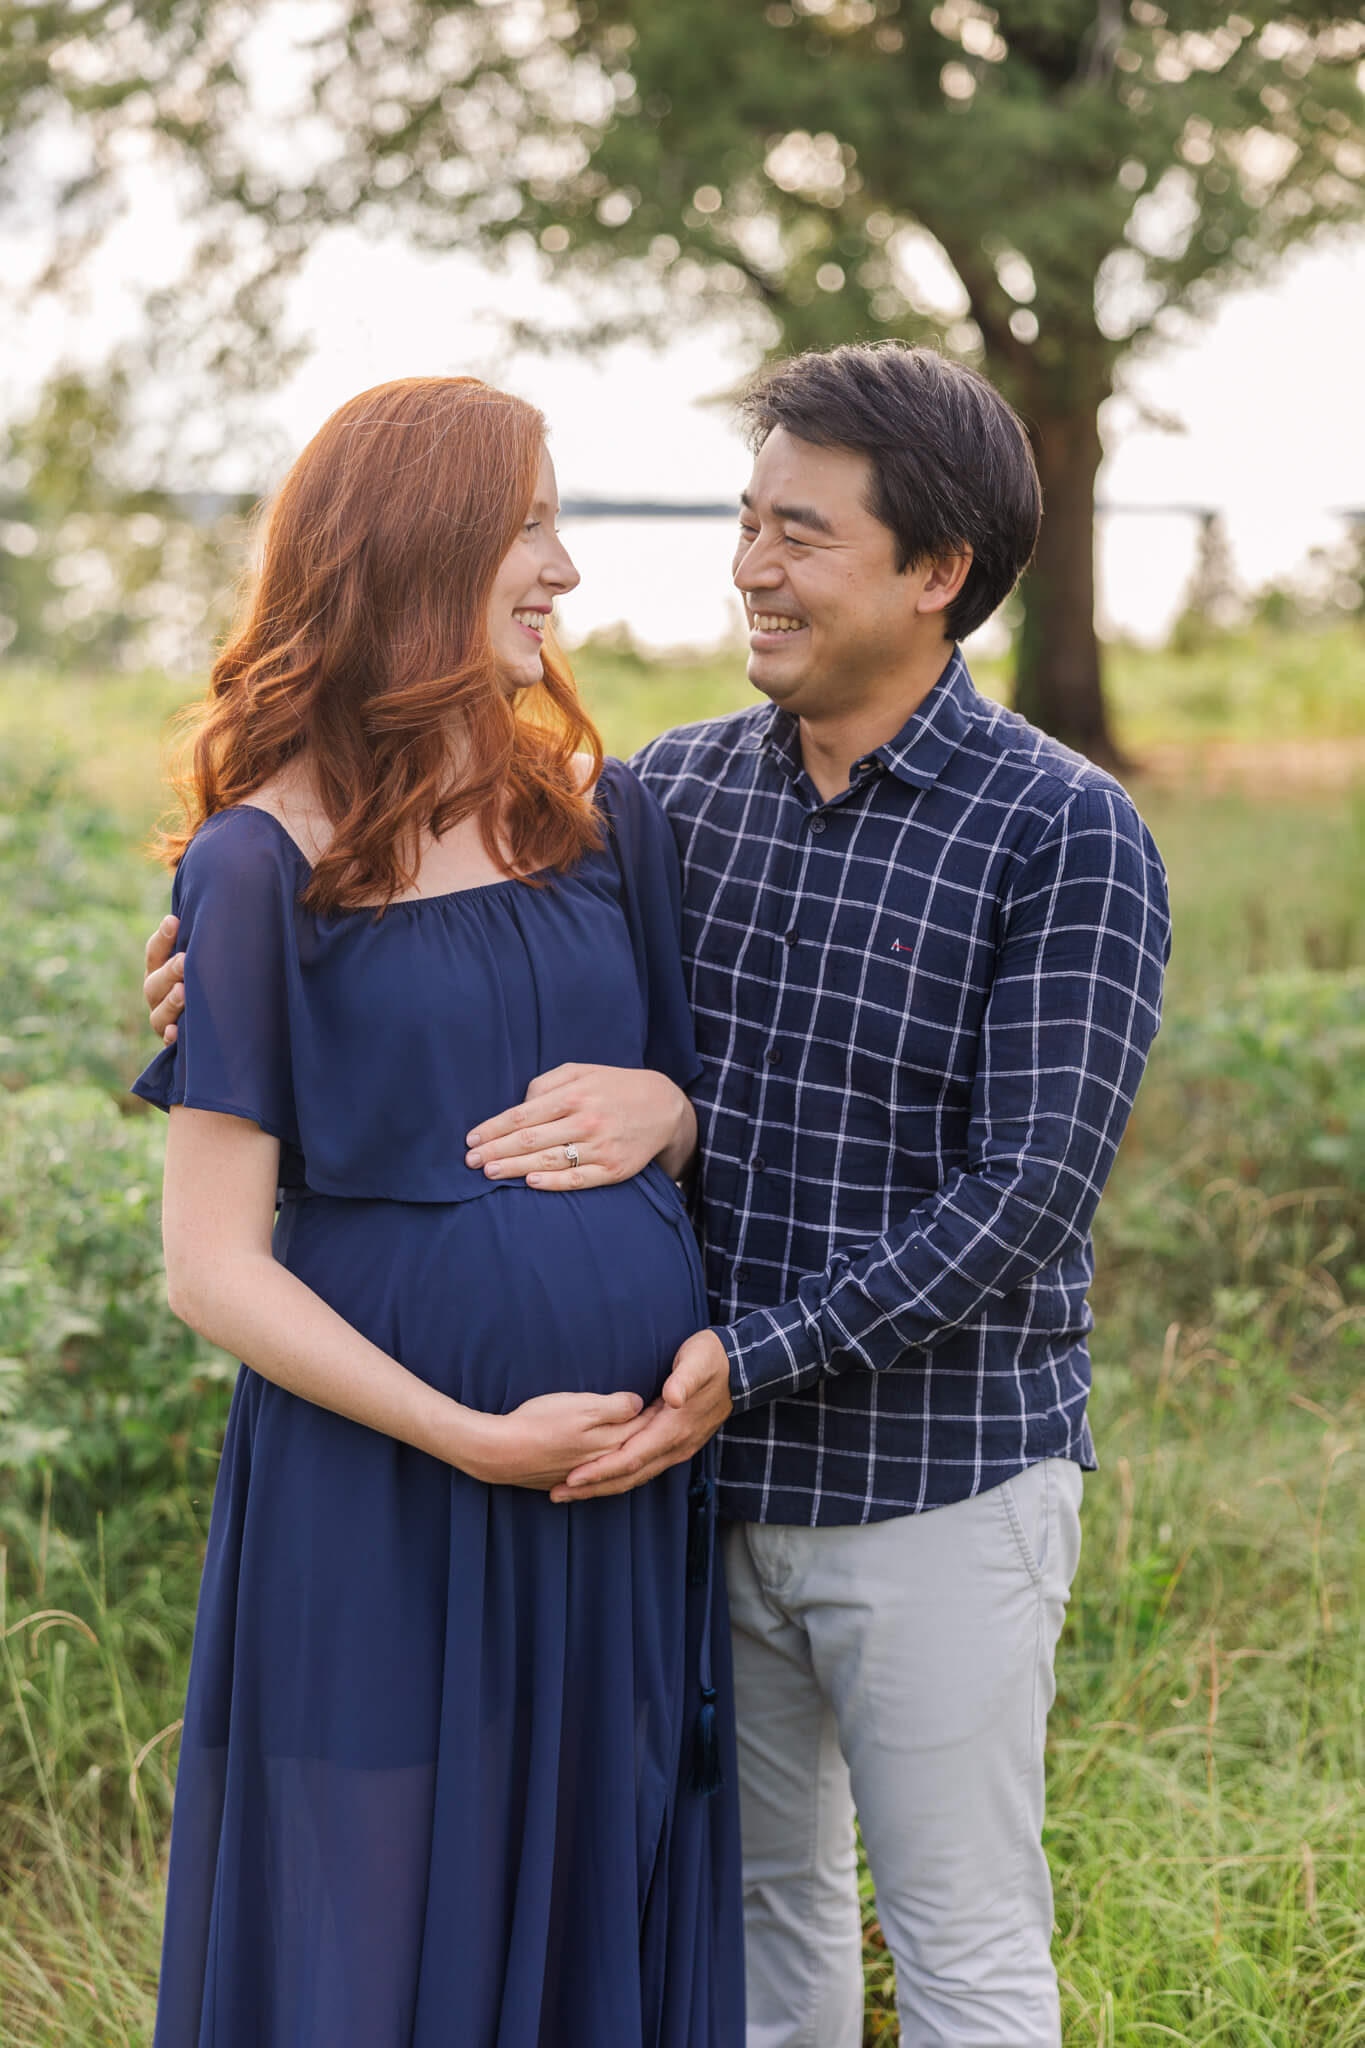 Mom and dad capture a moment together during recent maternity session captured by molly berry photography - your augusta maternity photographer.